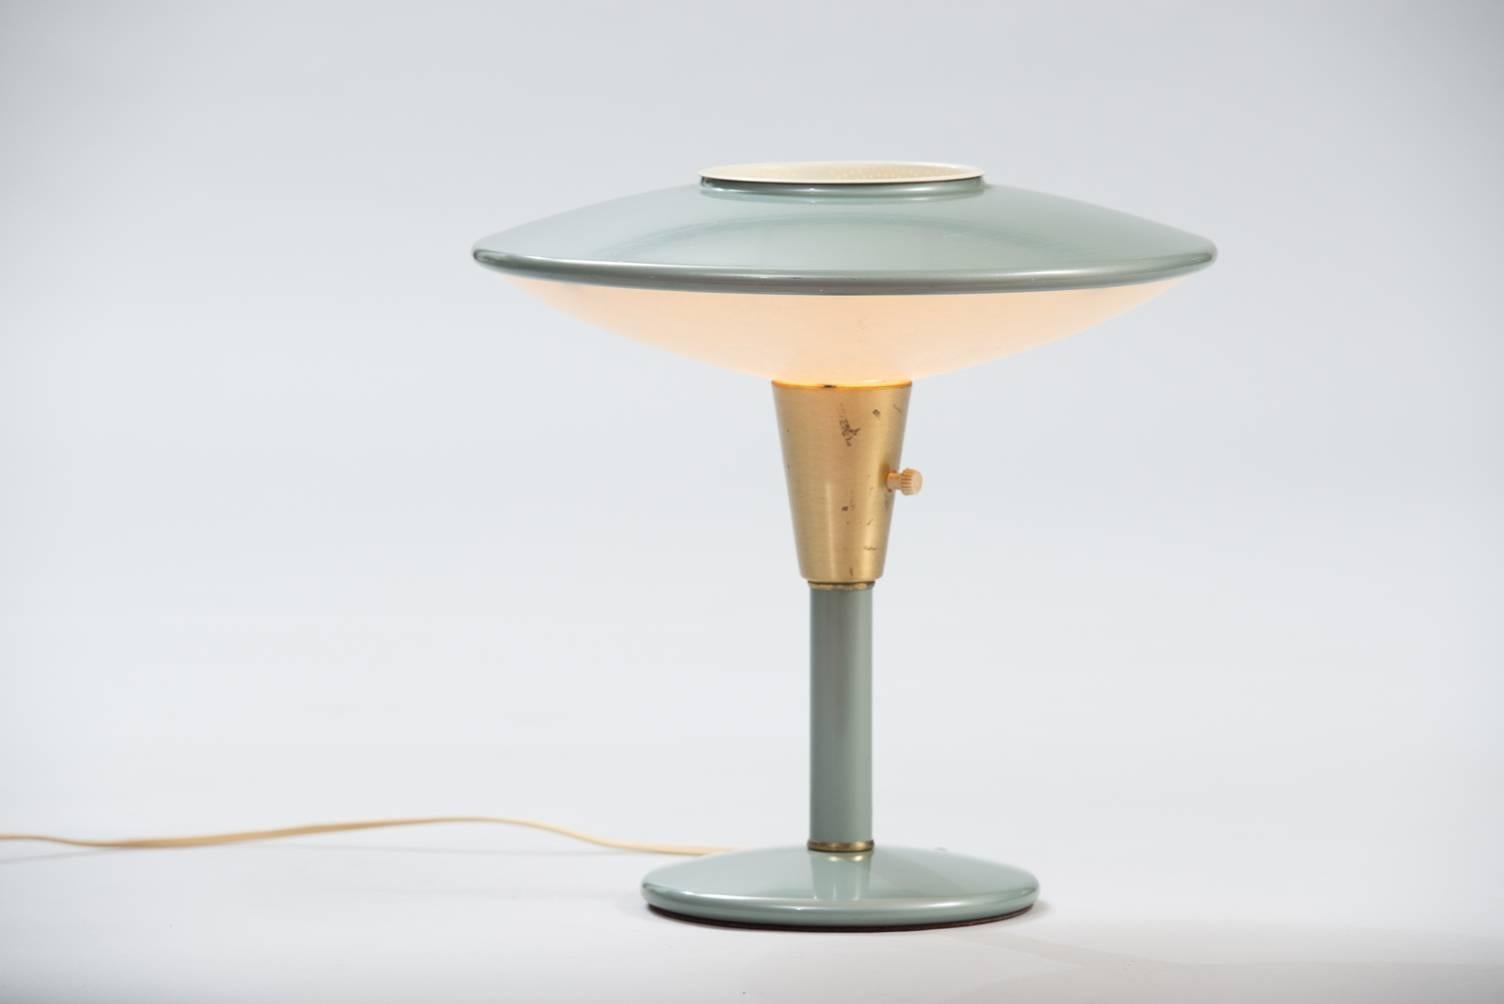 Green metal painted and acrylic table/desk lamp, model 2055.